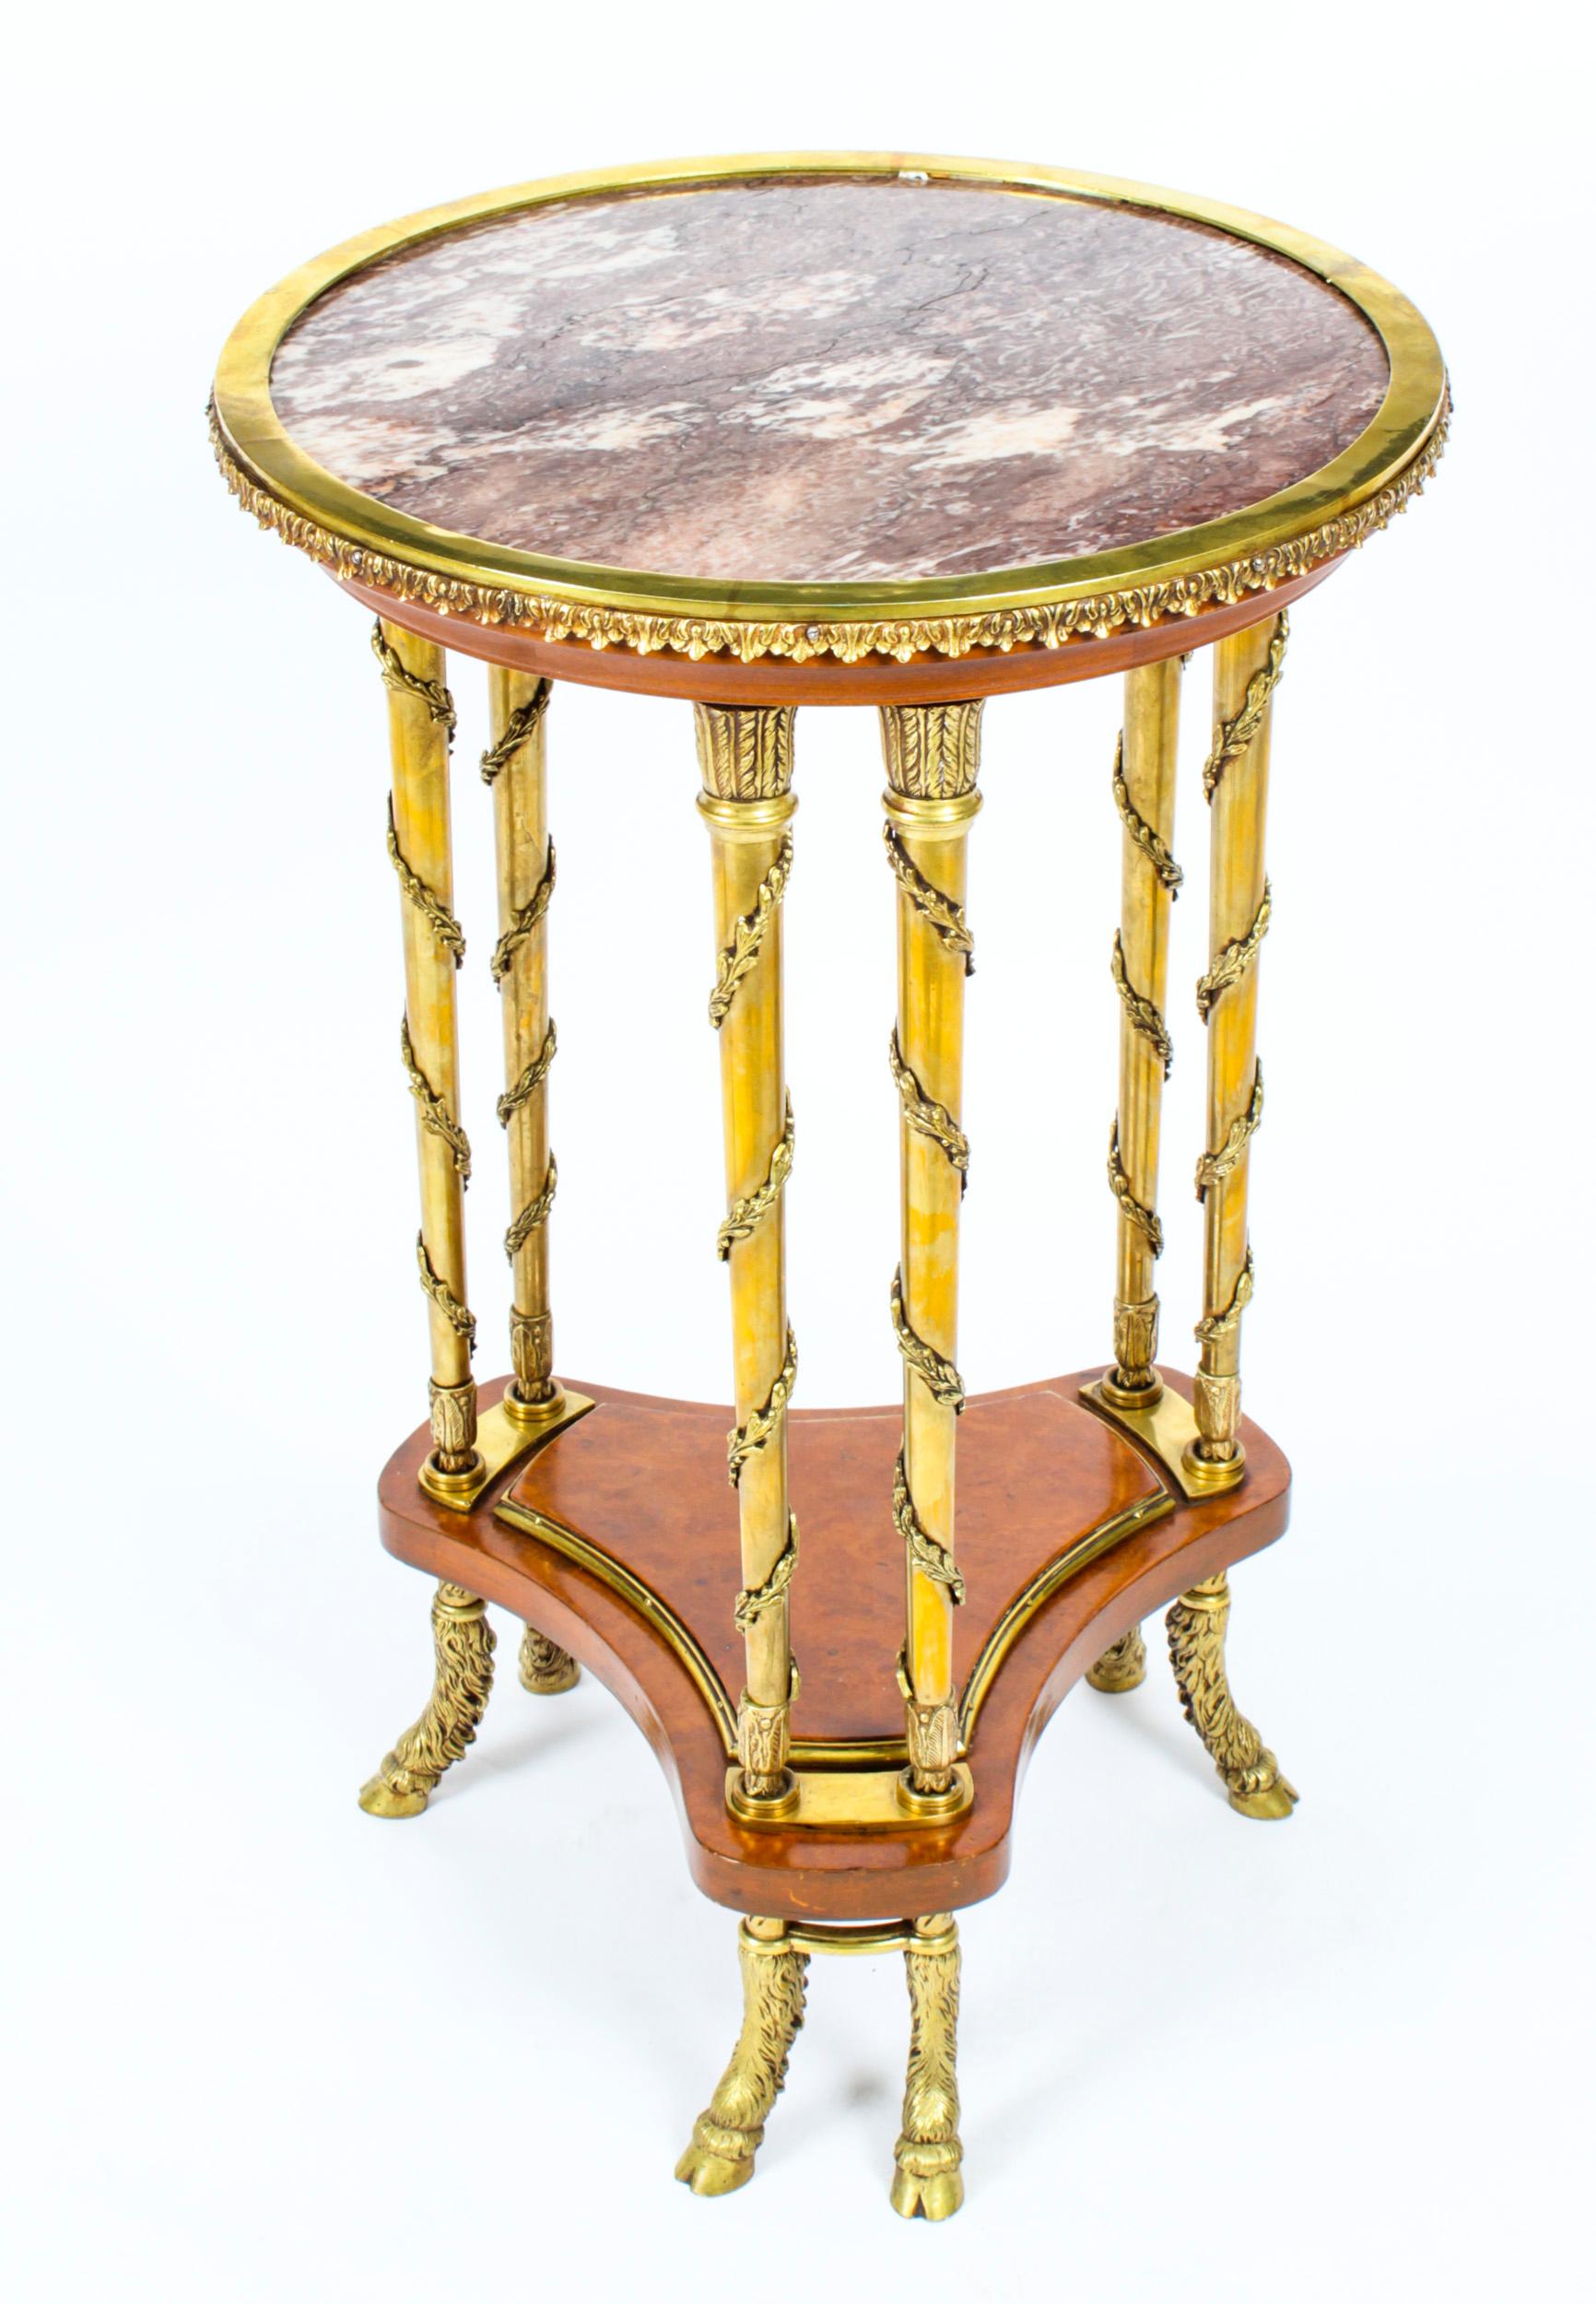 Antique French Ormolu Marble Topped Occasional Table 19th Century 7